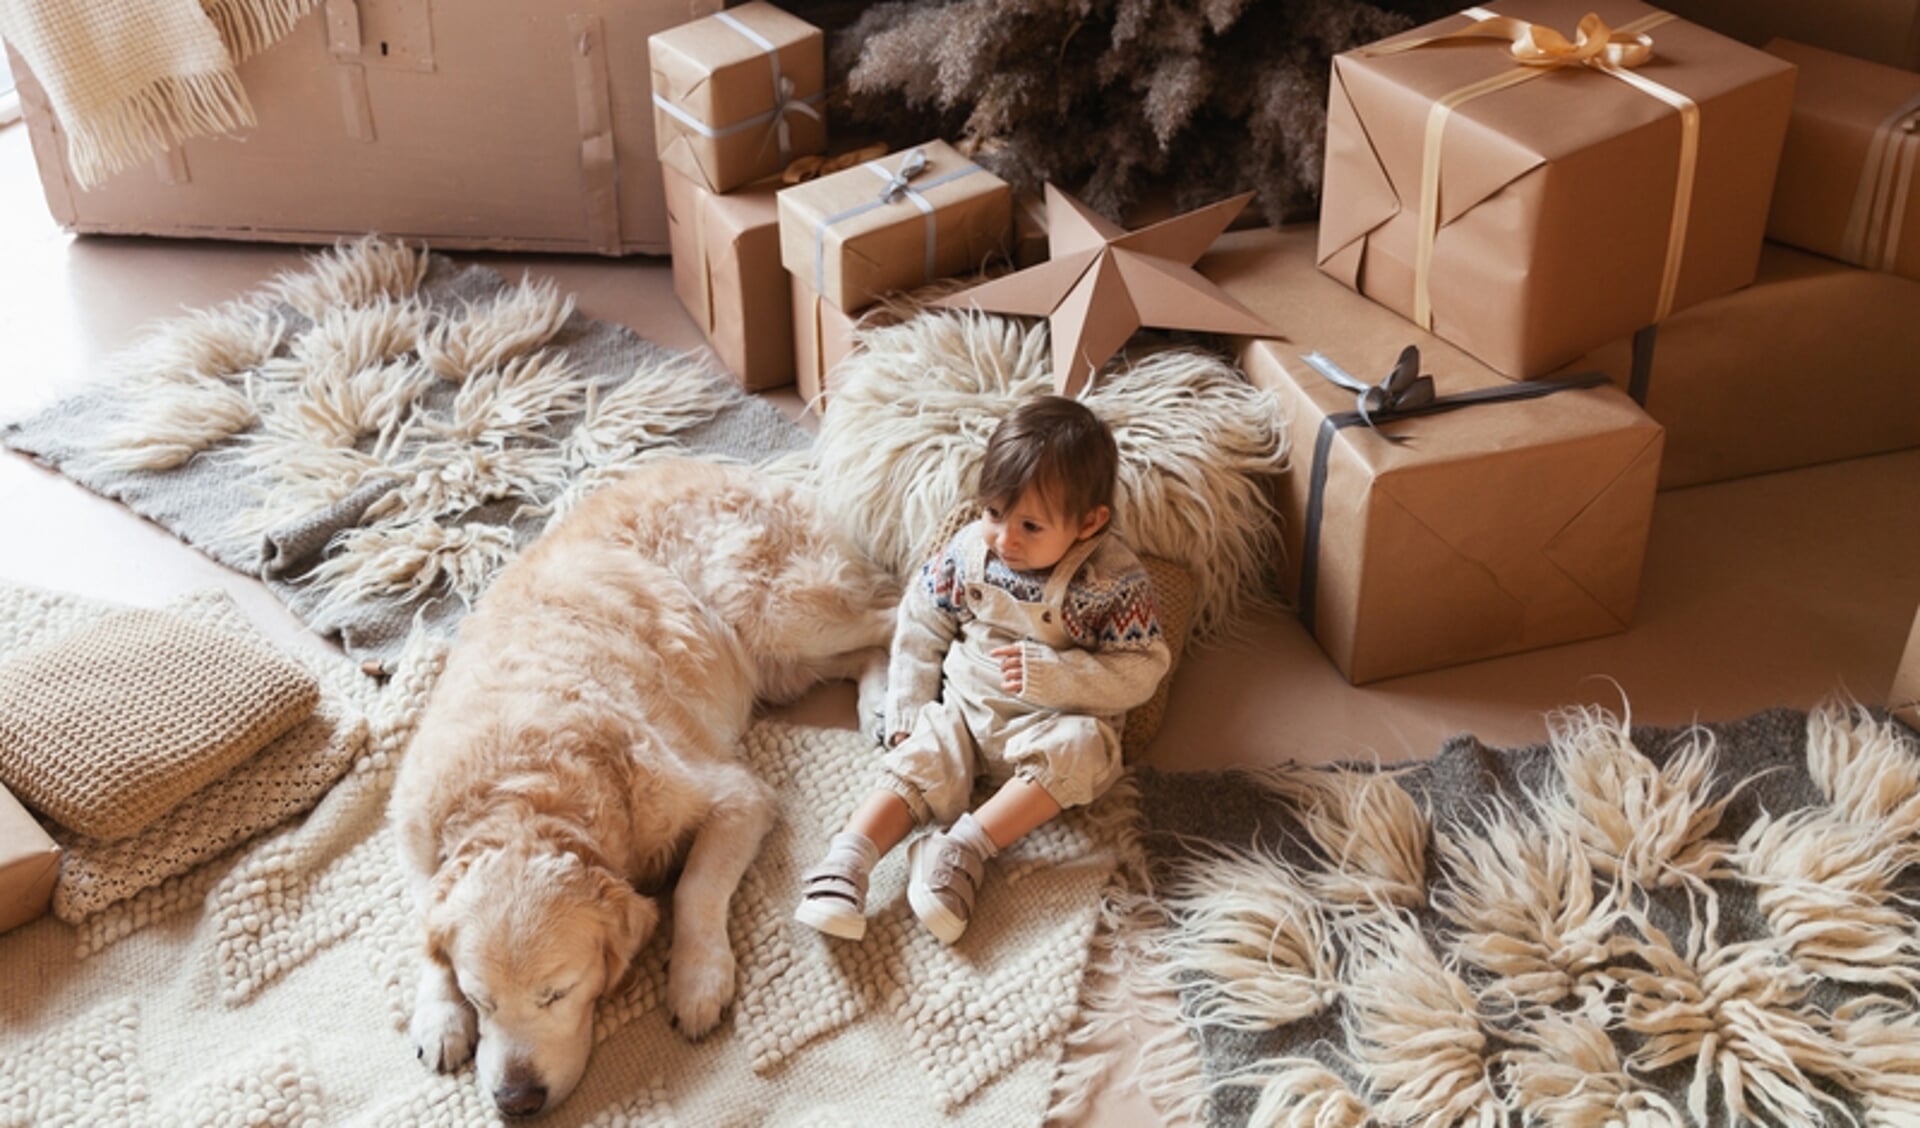 Beautiful baby wearing gender neutral clothes with golden retriever dog near alternative eco friendly Christmas tree and decorations in pastel monochrome scandinavian style living room.